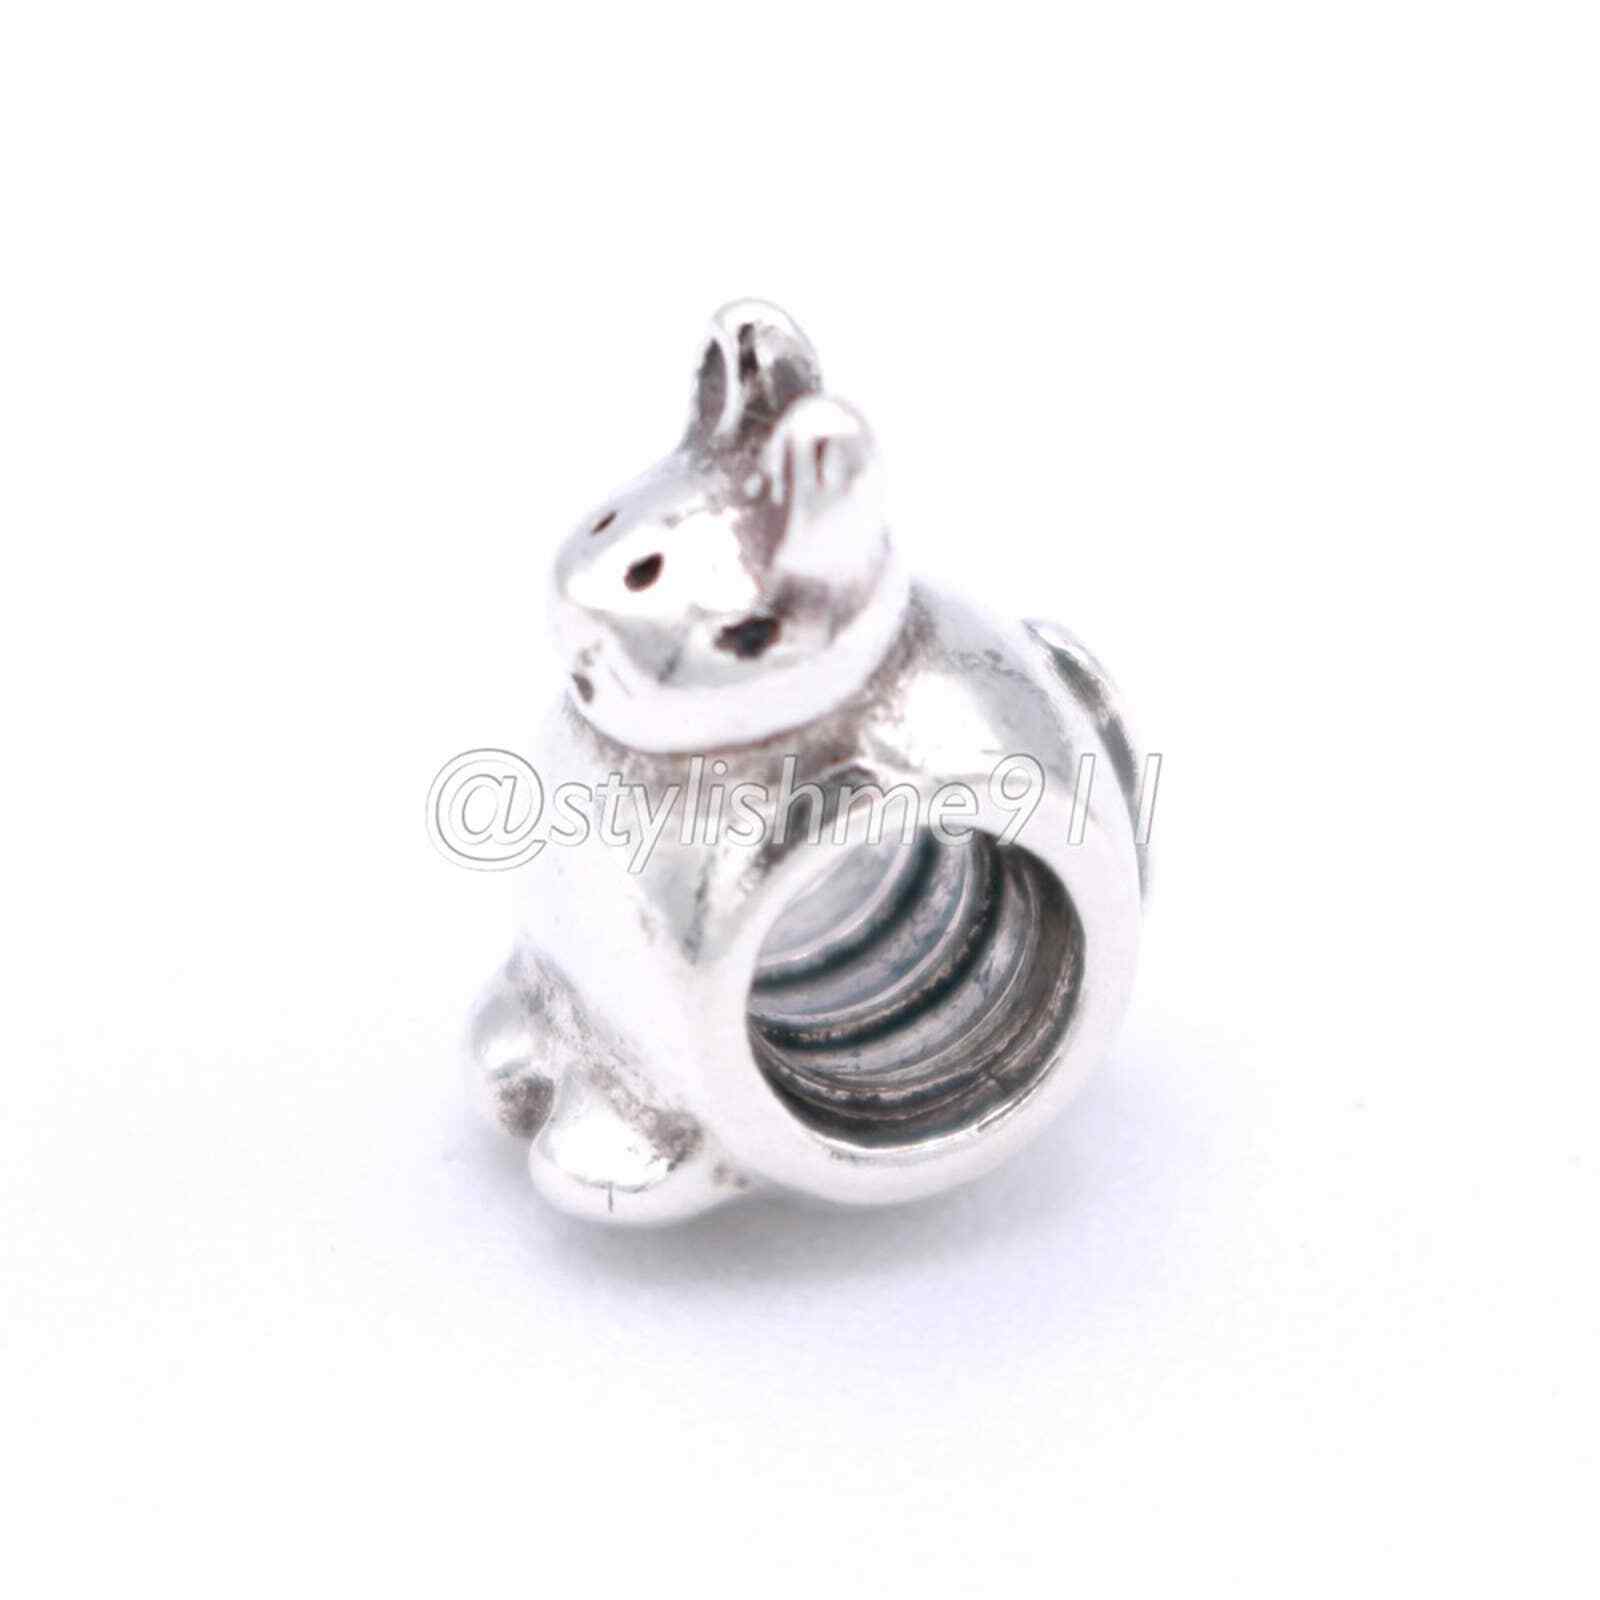 Authentic PANDORA Sterling Silver Kitty Cat Charm - image 7